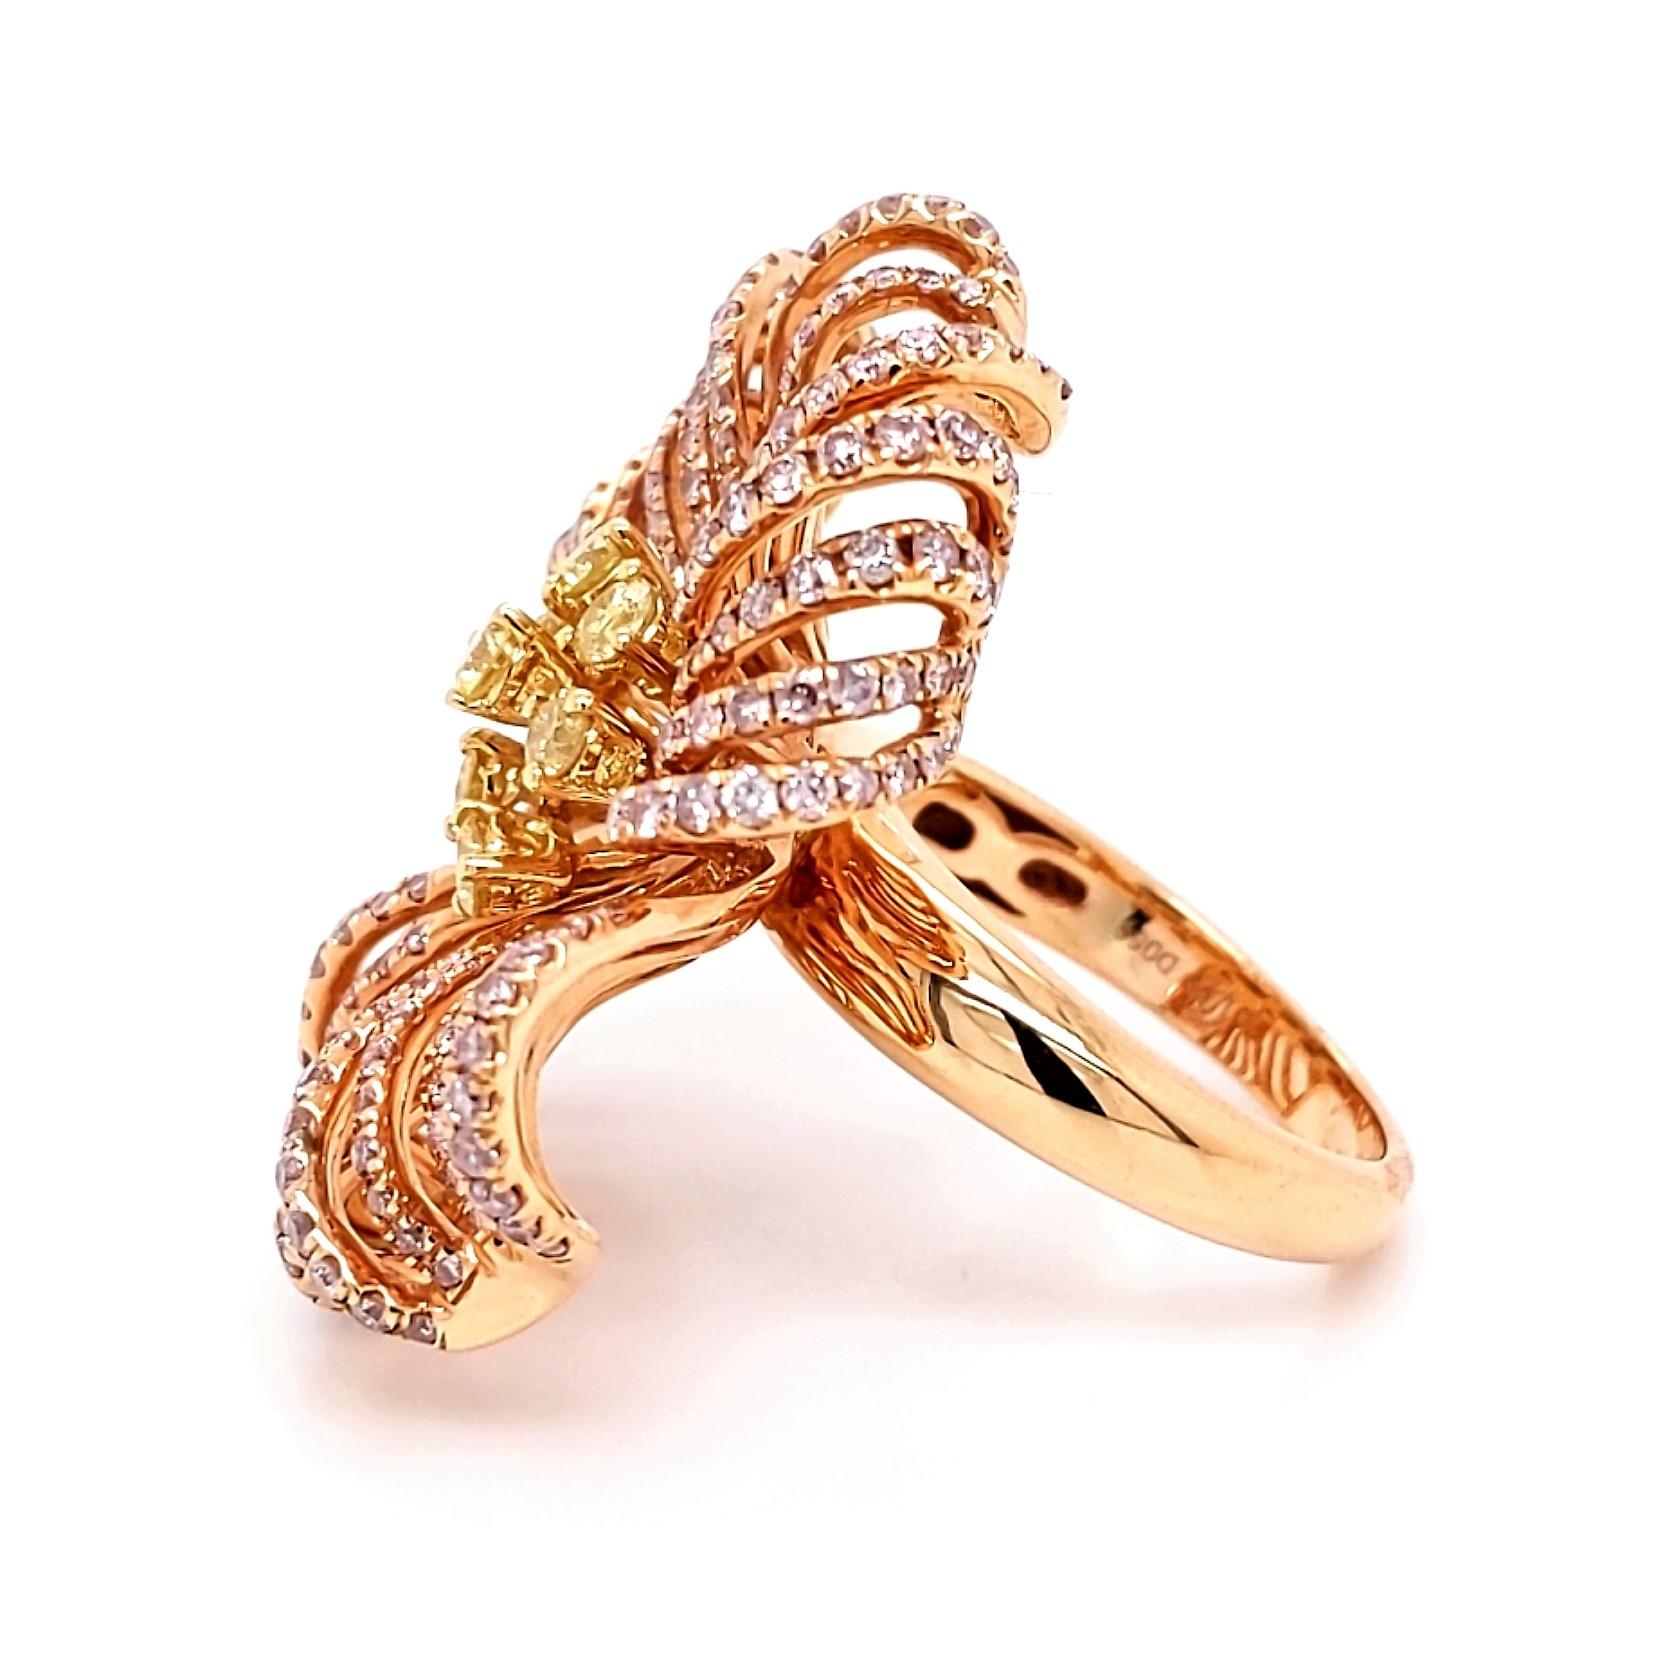 Contemporary 2.58 Carat Natural Fancy Yellow and Pink Diamond Flower Ring in 18k Rose Gold For Sale